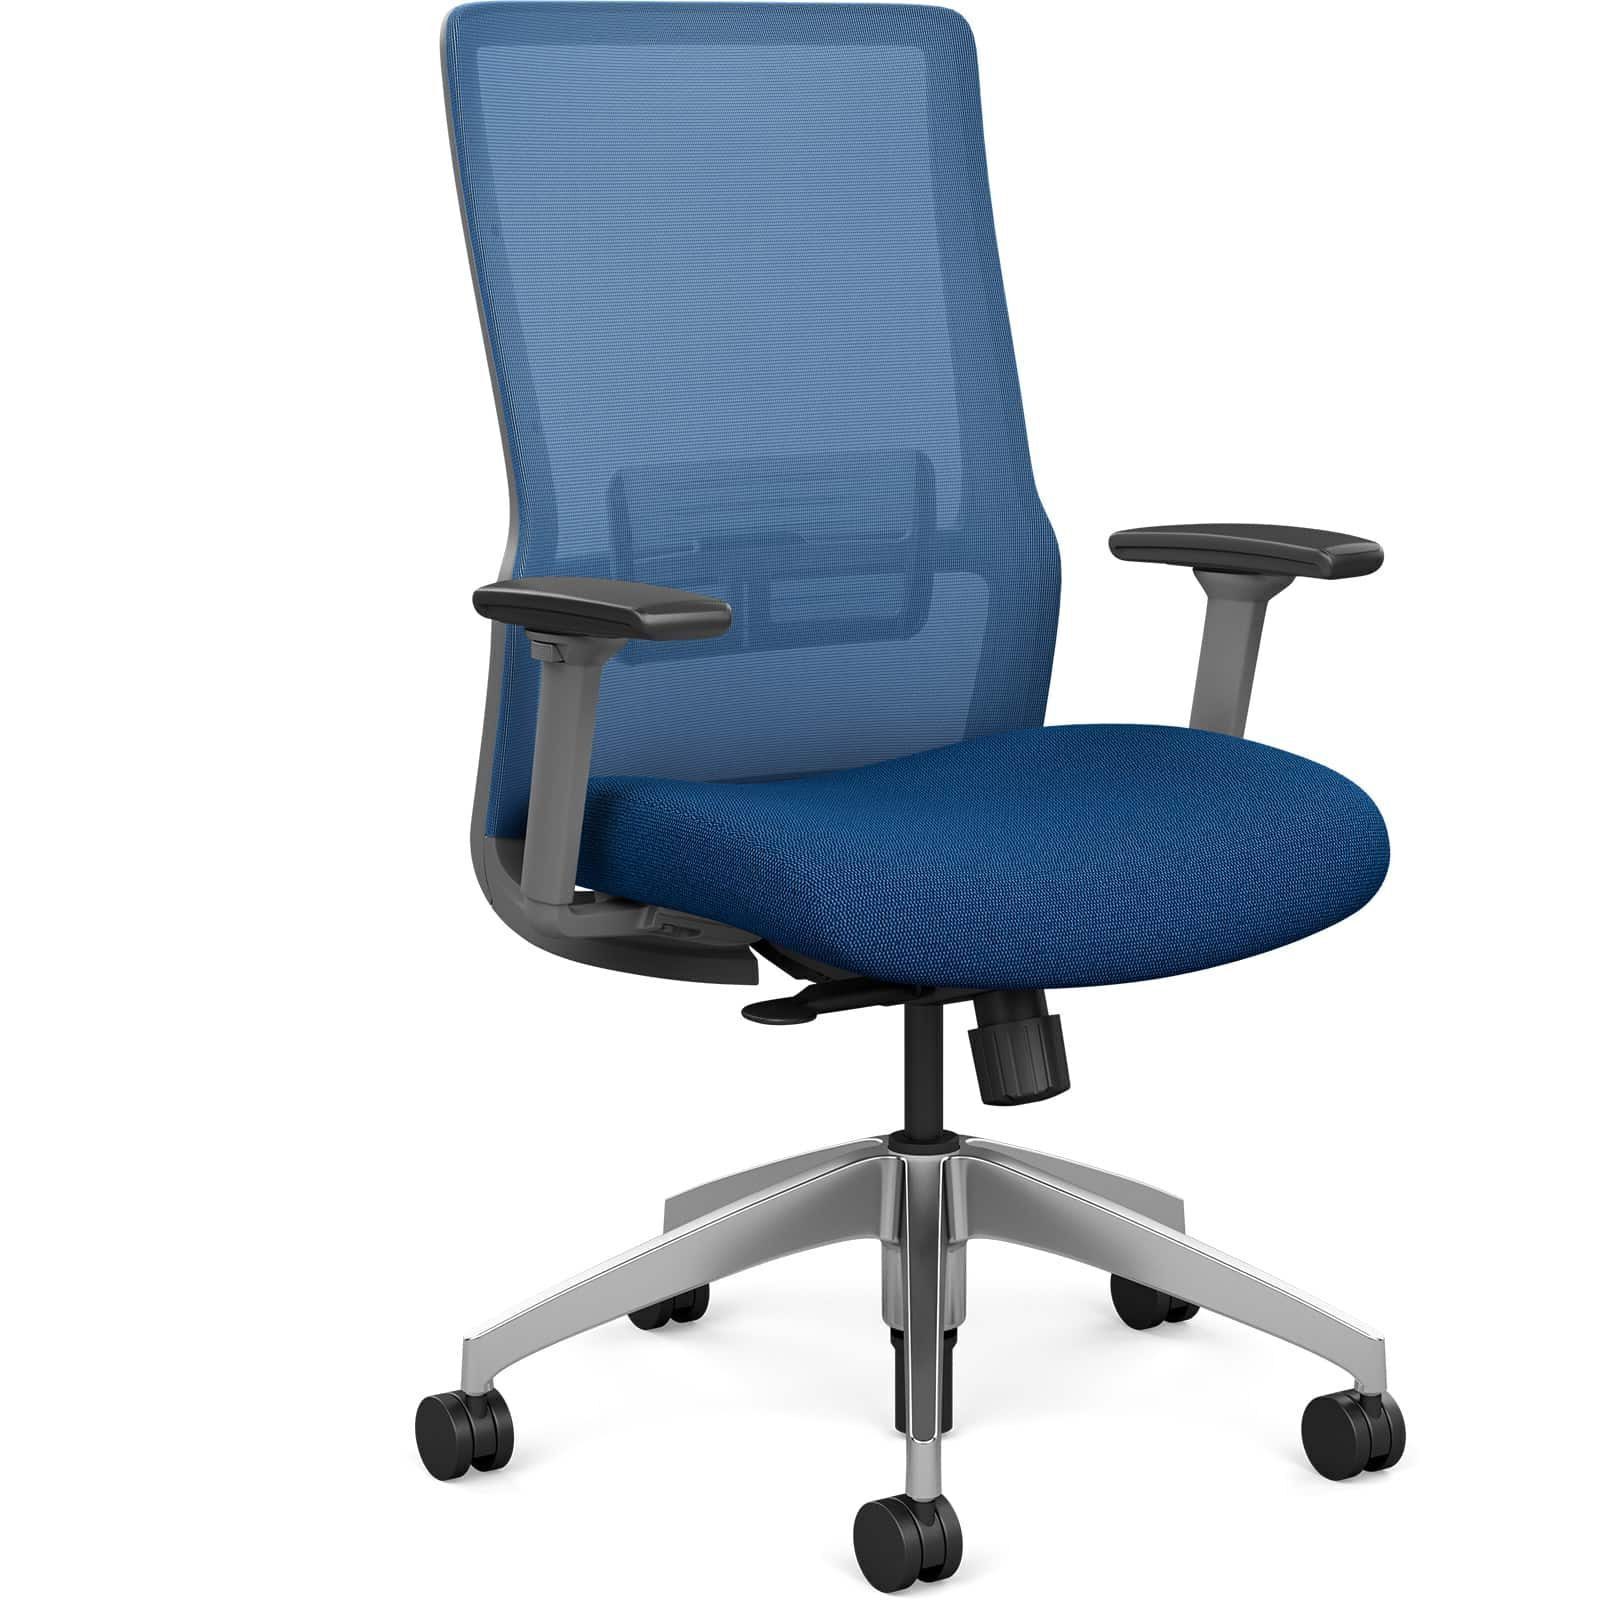 SitOnIt Seating Novo Chair: Office Chairs Los Angeles